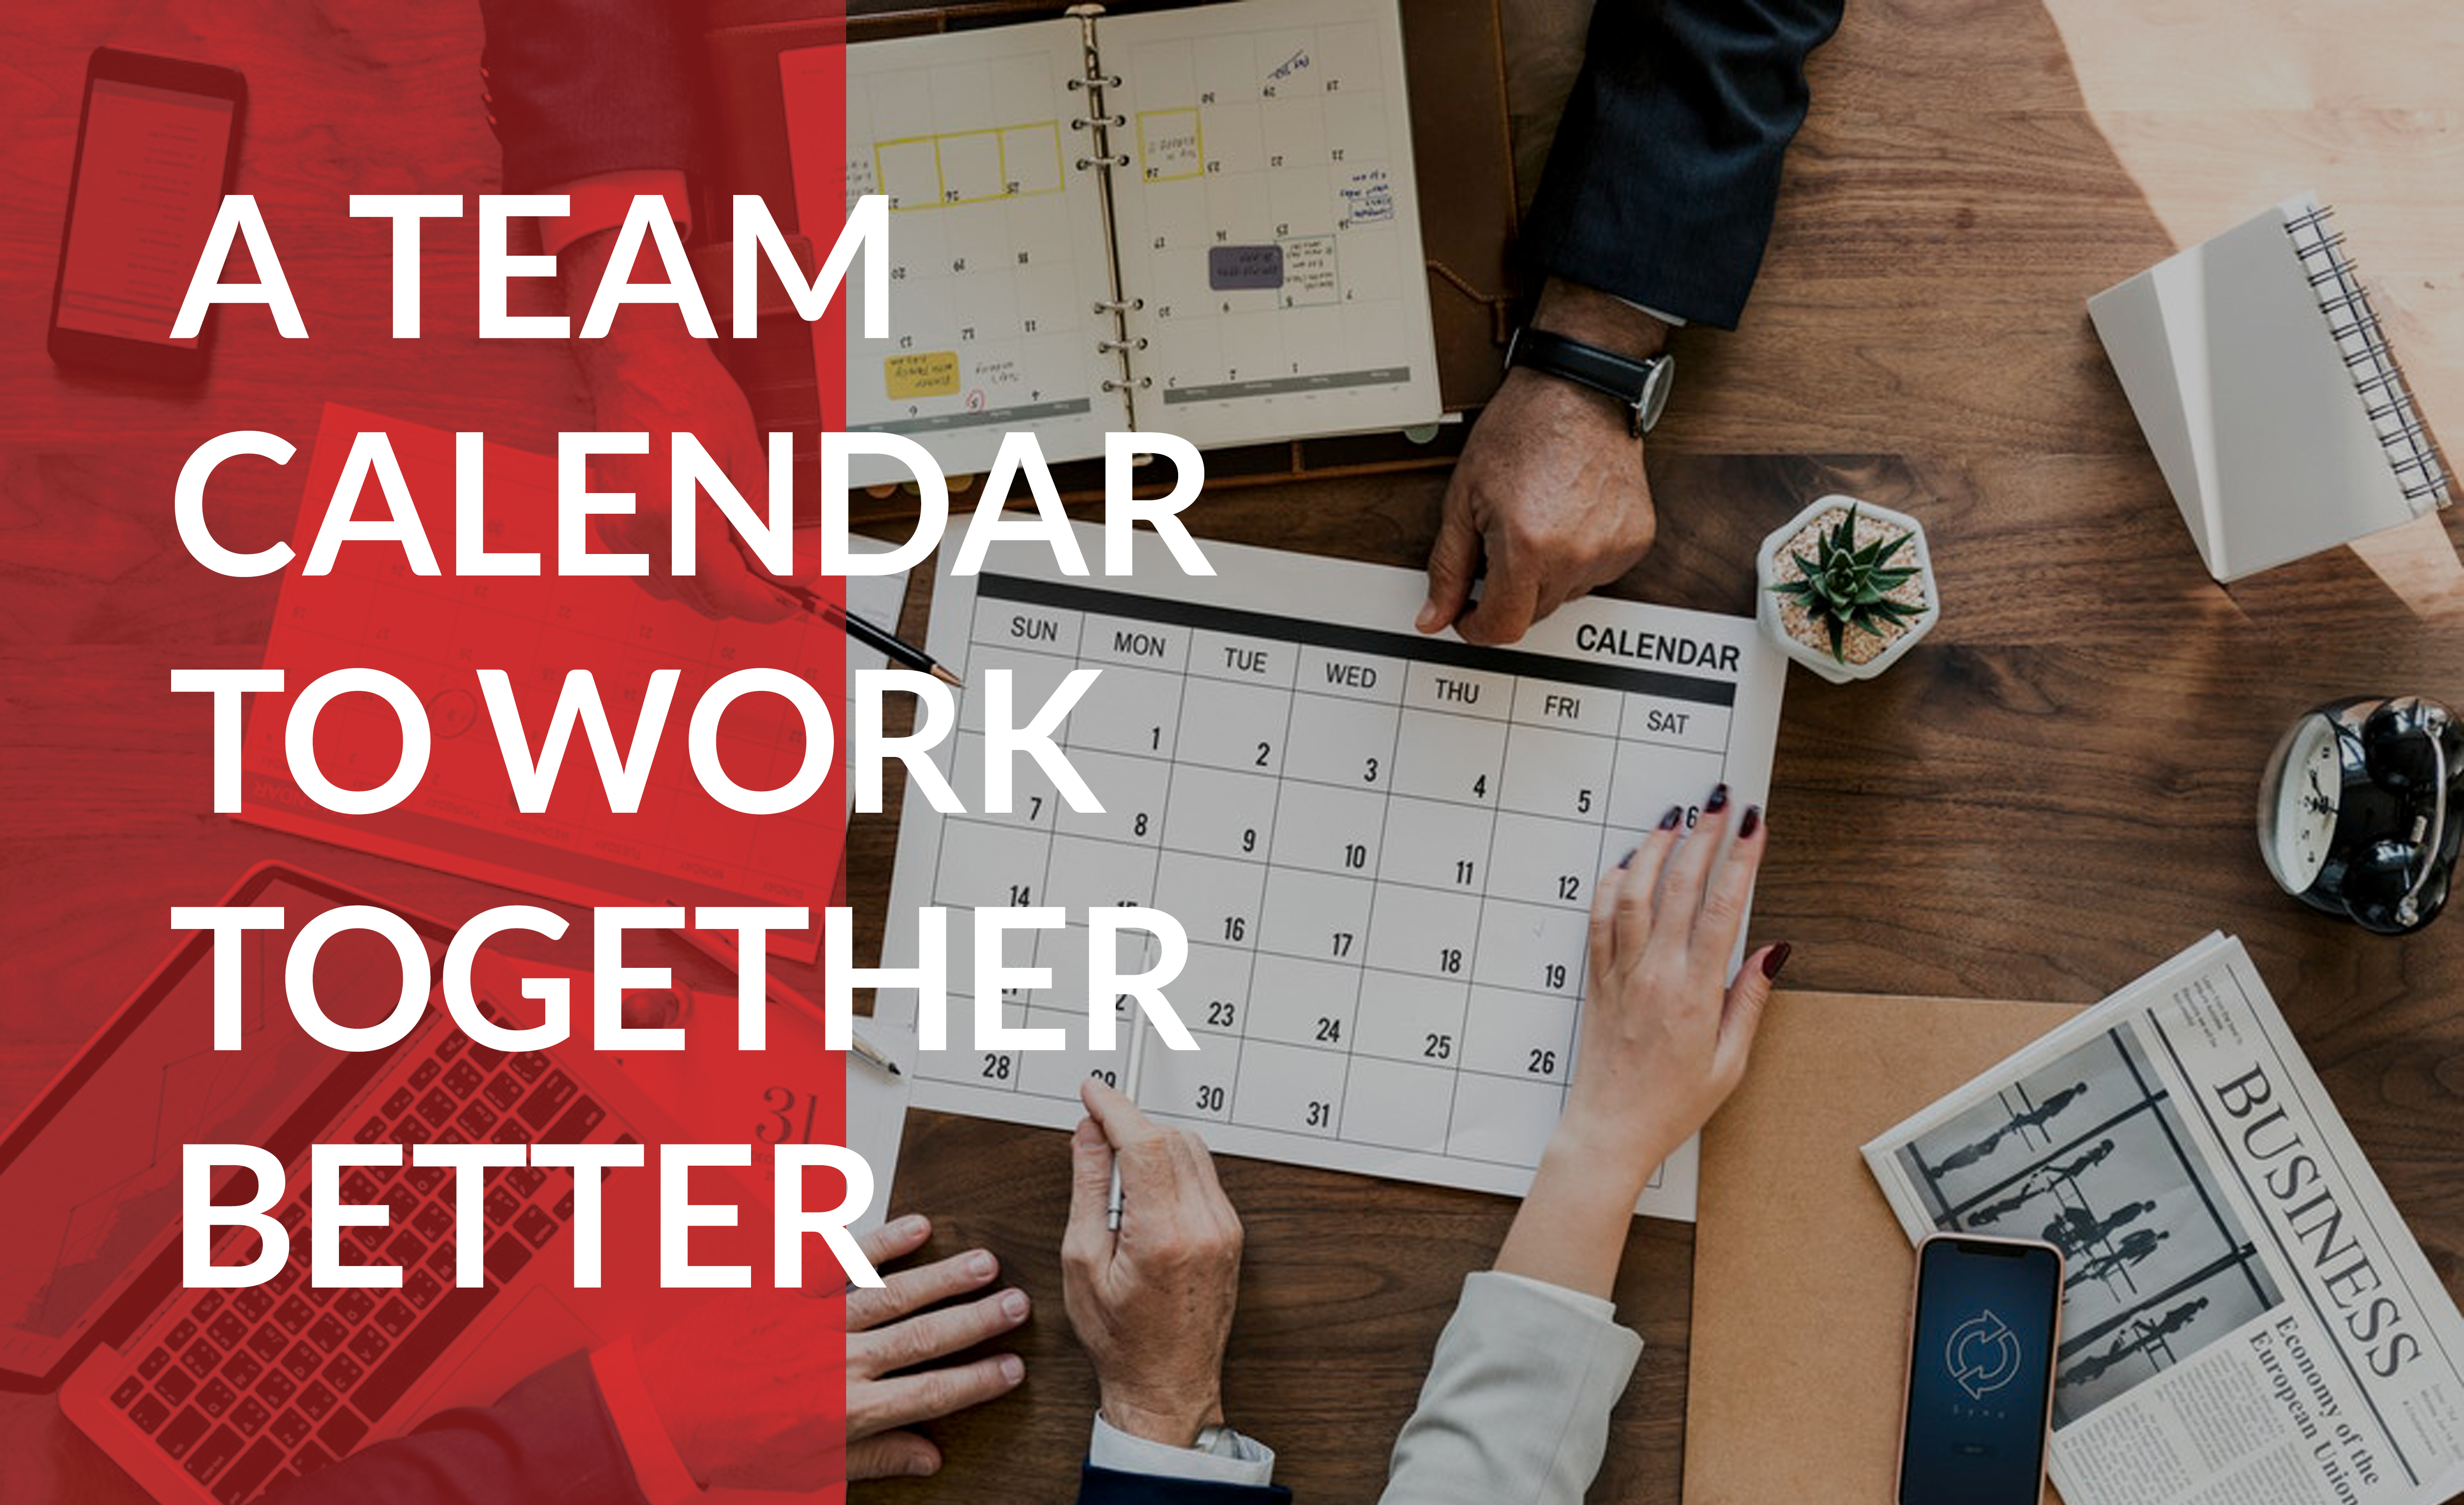 Help your teams work together better with the same calendar.